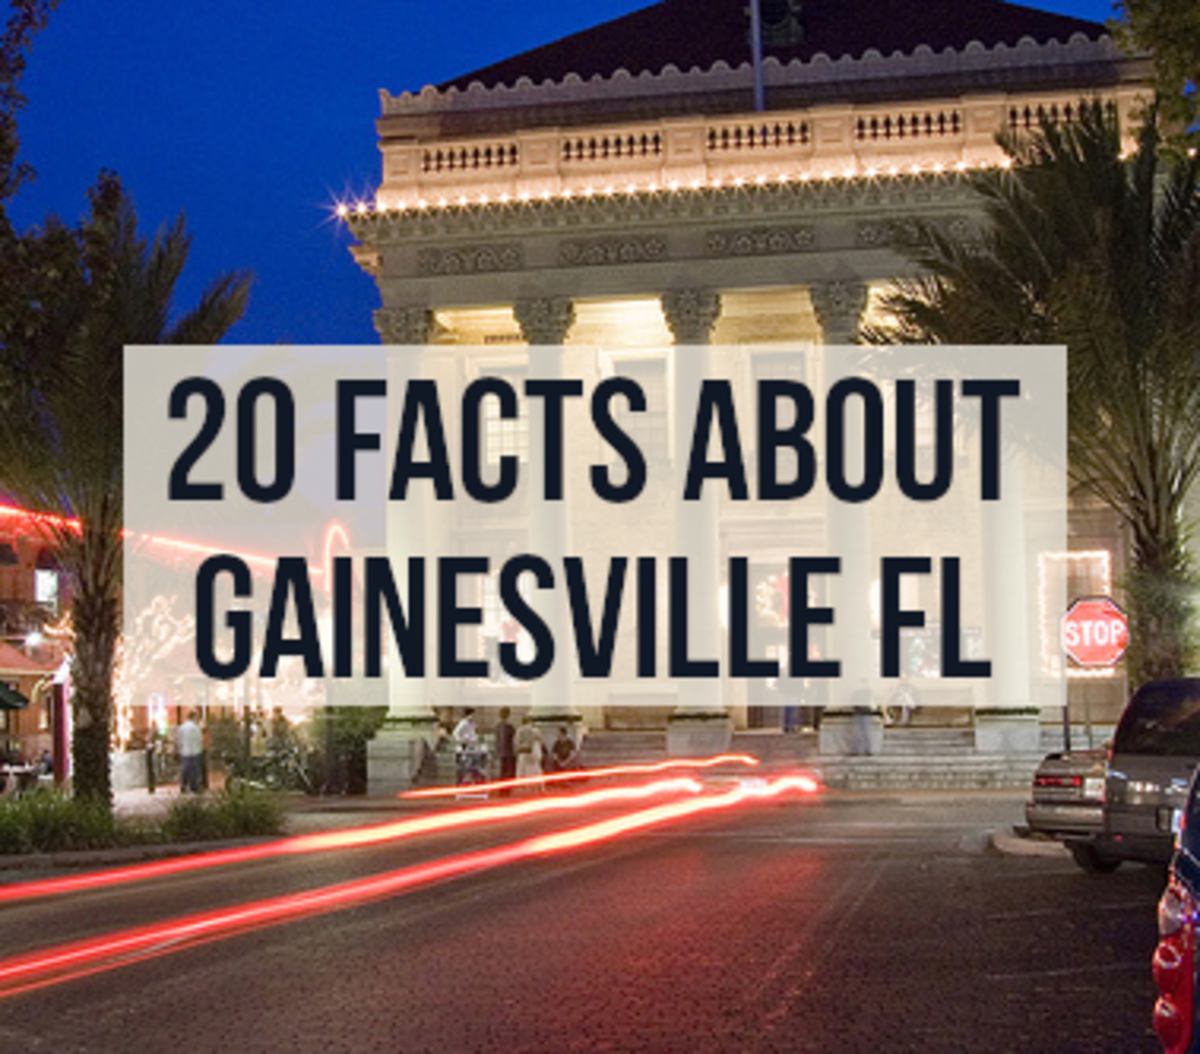 How bad is gainesville florida?